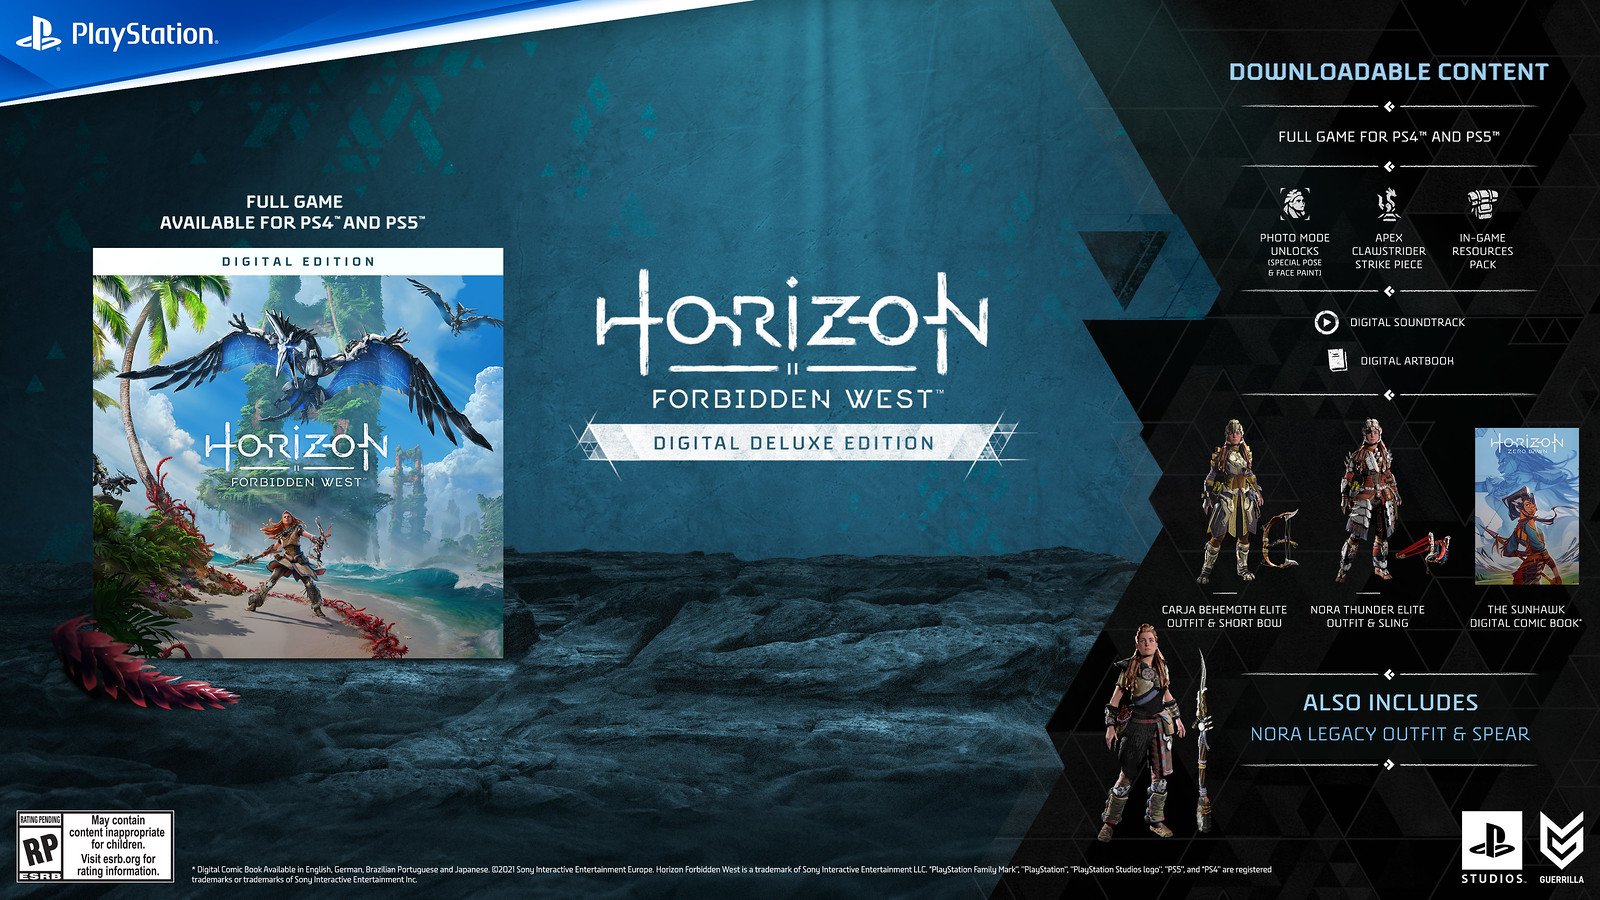 Horizon Forbidden West Complete Edition is officially coming to